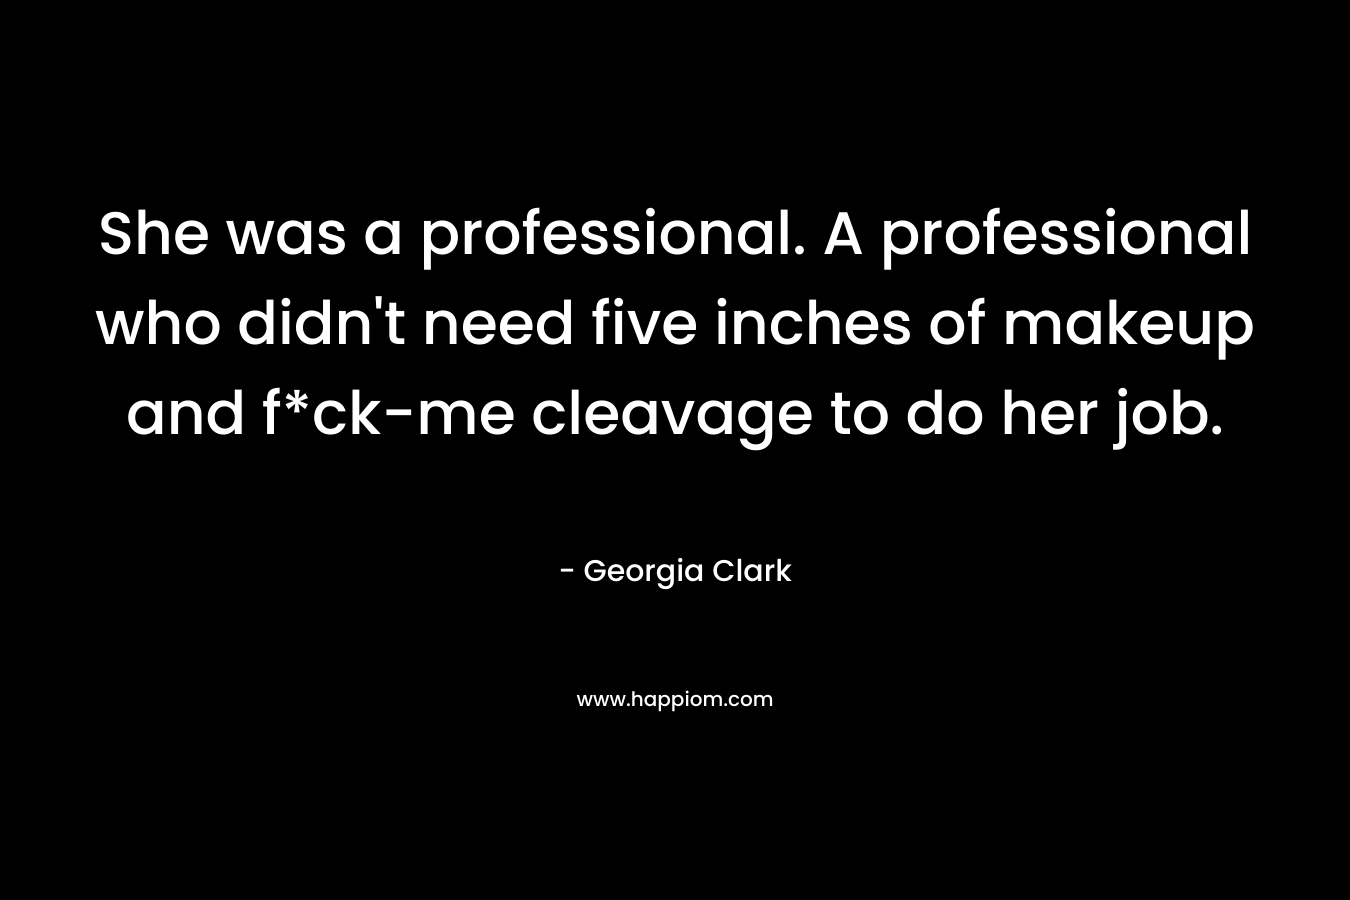 She was a professional. A professional who didn’t need five inches of makeup and f*ck-me cleavage to do her job. – Georgia Clark